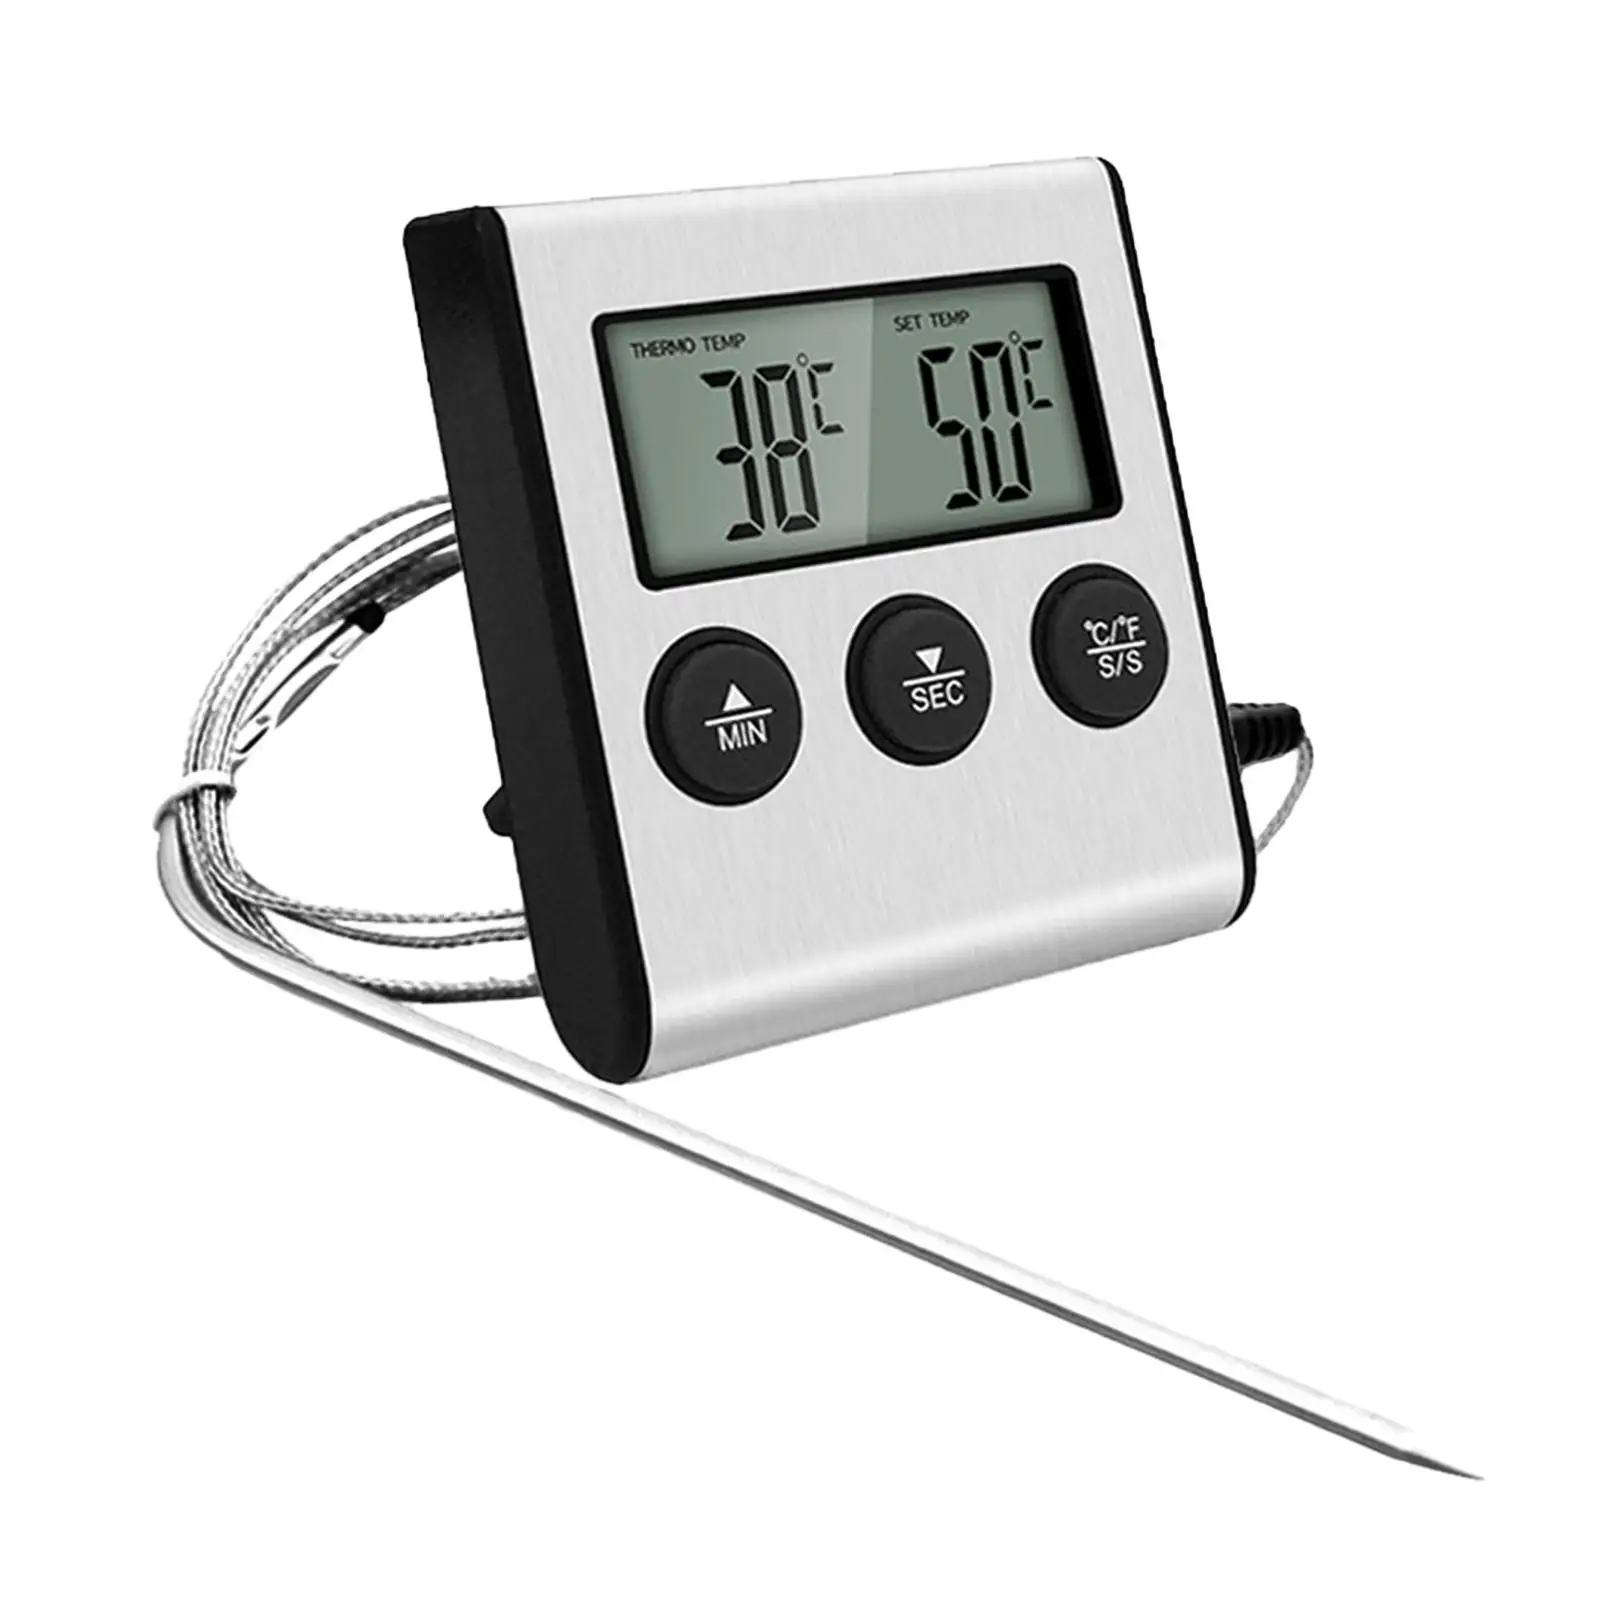 Cooking Thermometer LCD Backlight Instant Read Celsius/Fahrenheit Digital Meats Thermometer for BBQ Deep Fry Roast Oven Frying